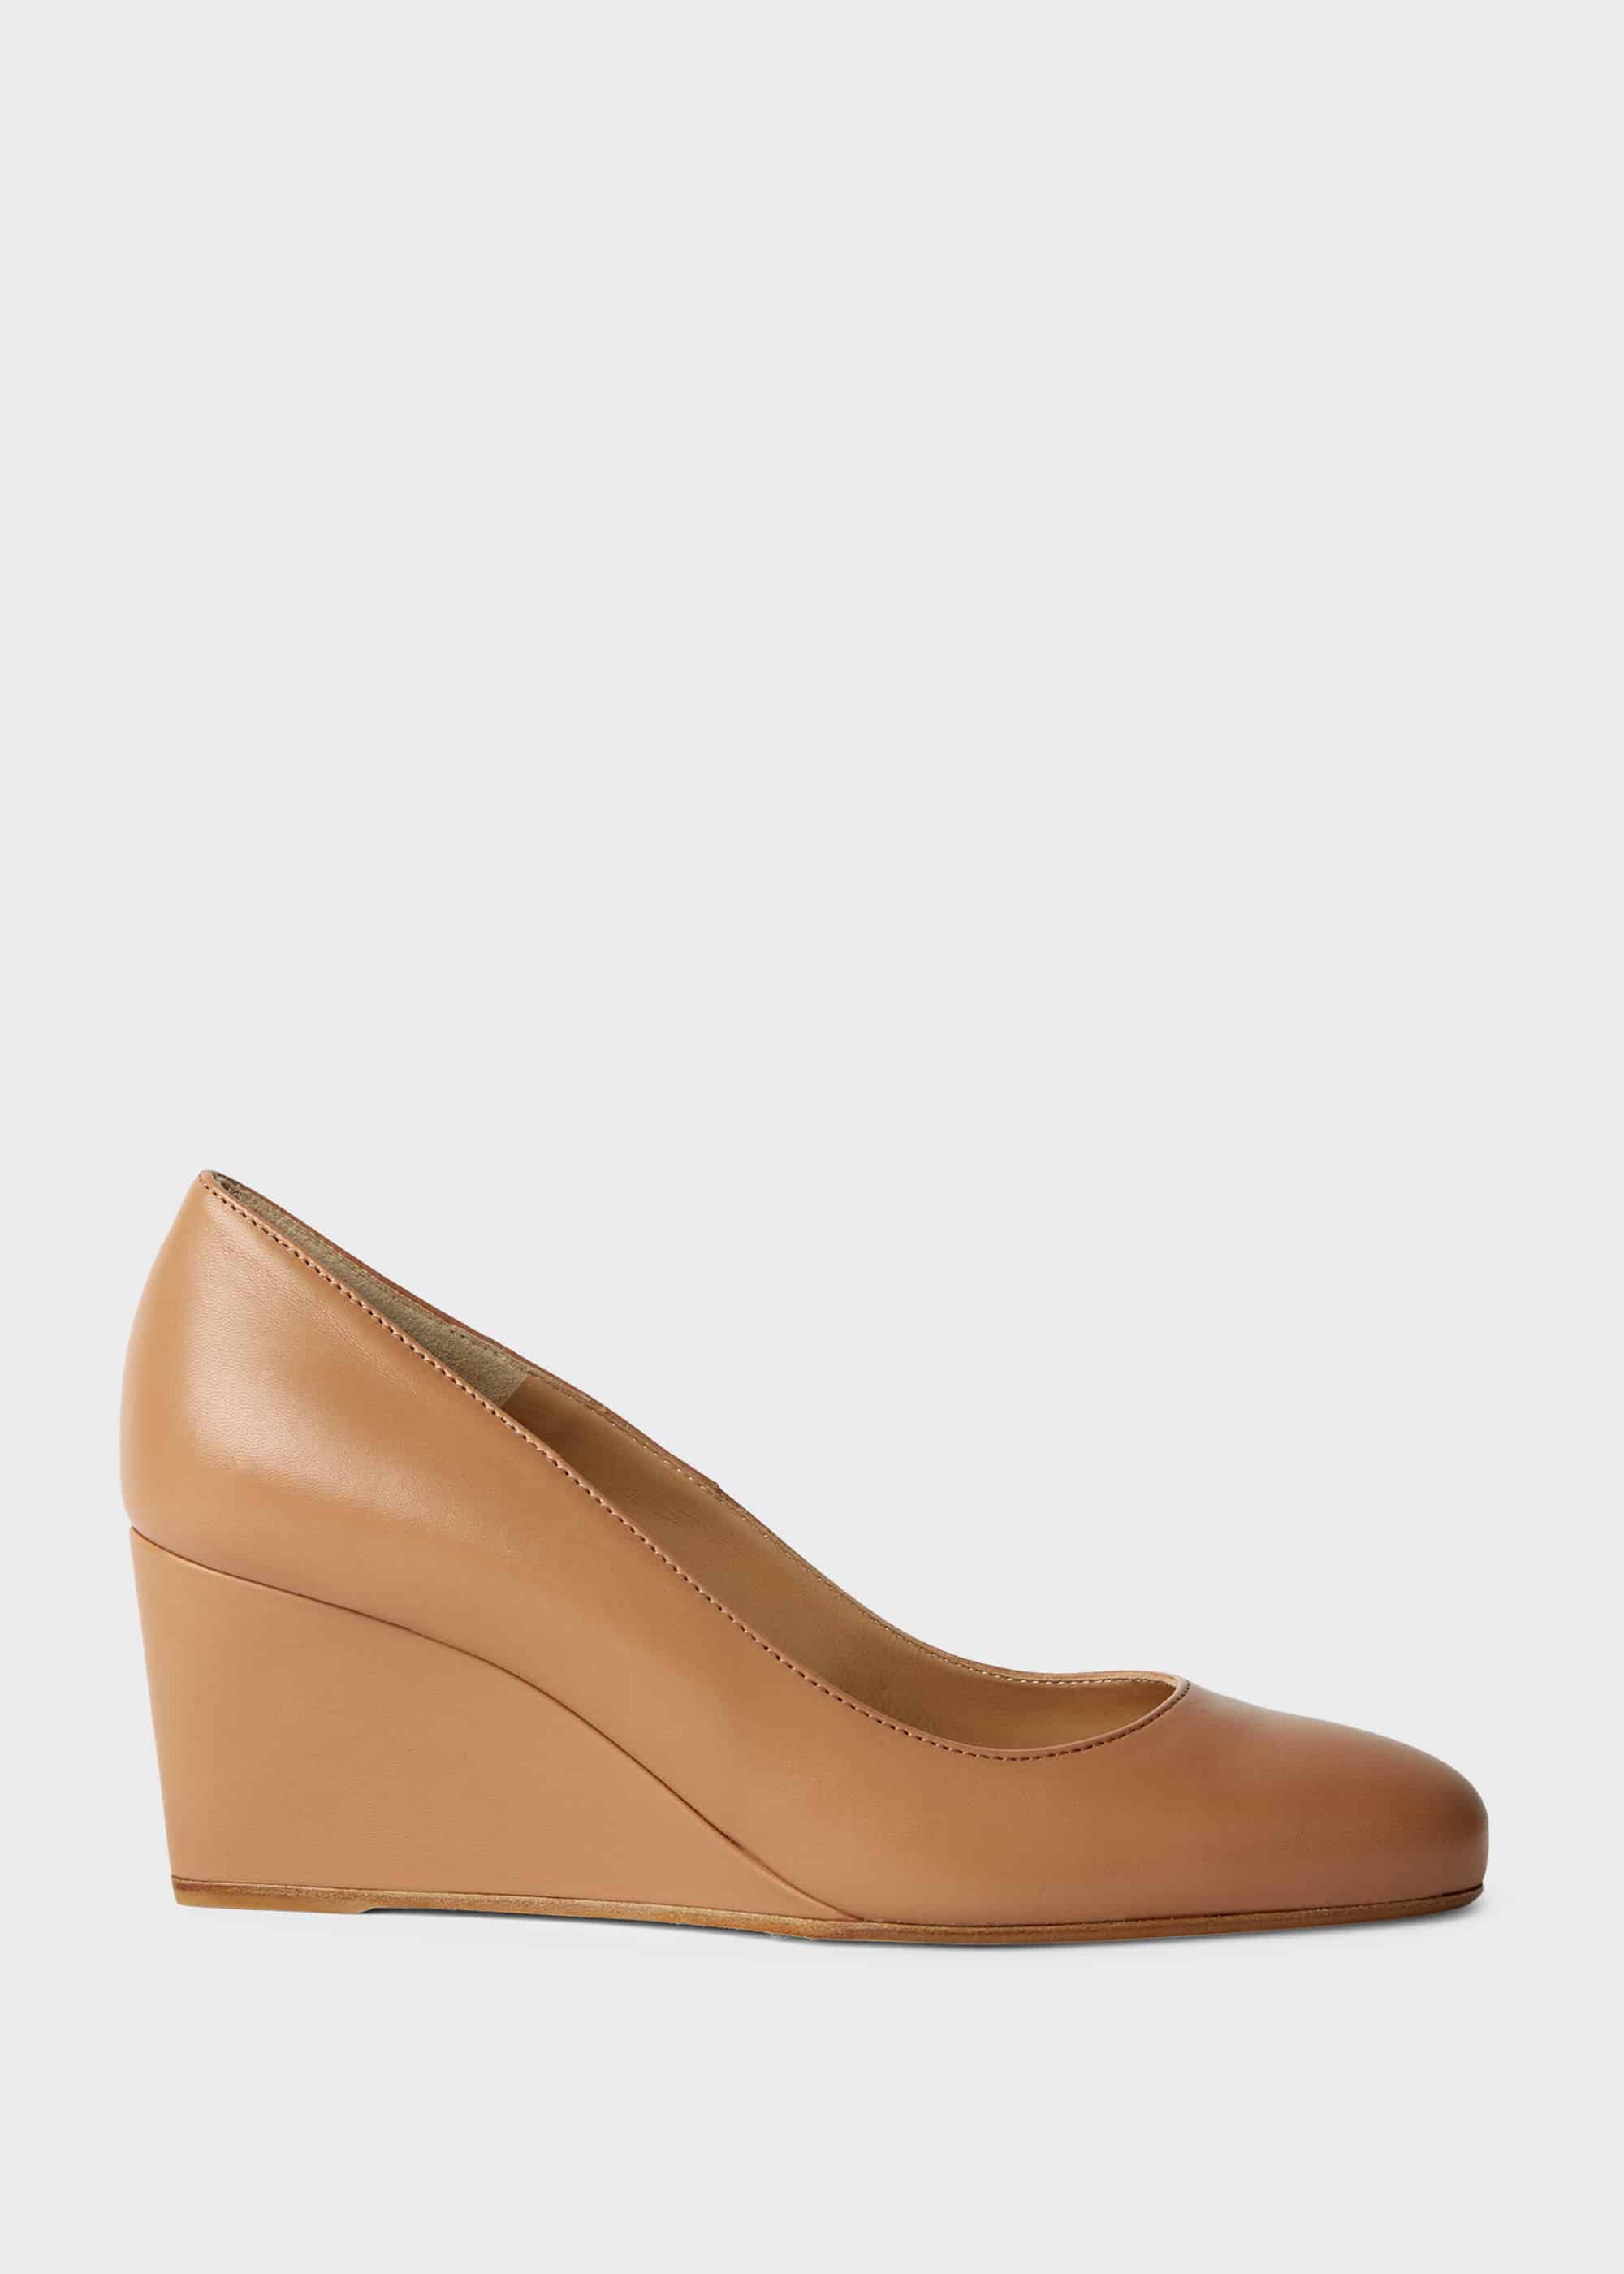 Emma Leather Wedge Court Shoes | Hobbs